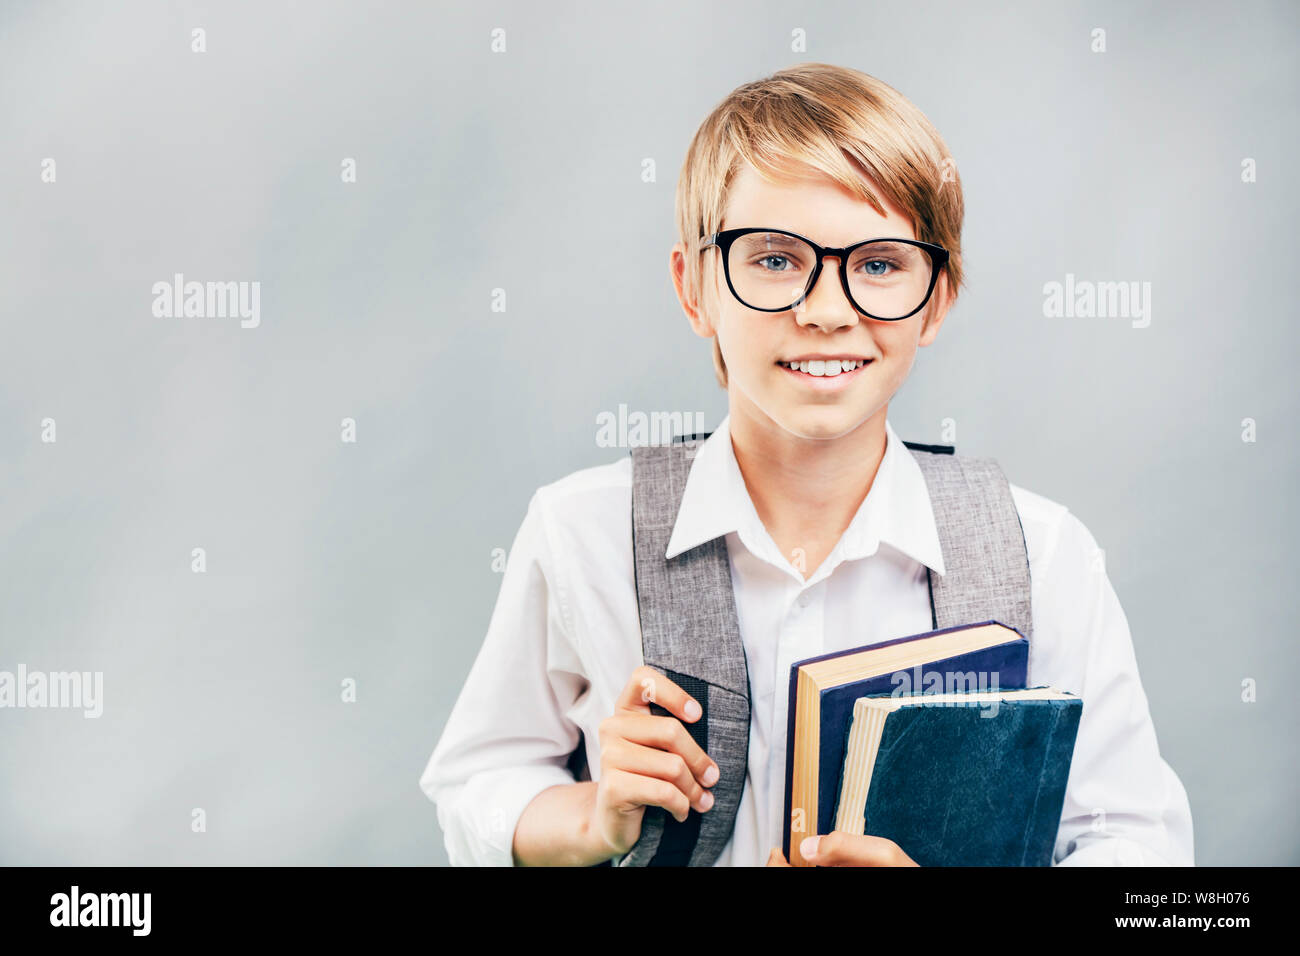 Cheerful pupil in glasses carrying books and a schoolbag Stock Photo